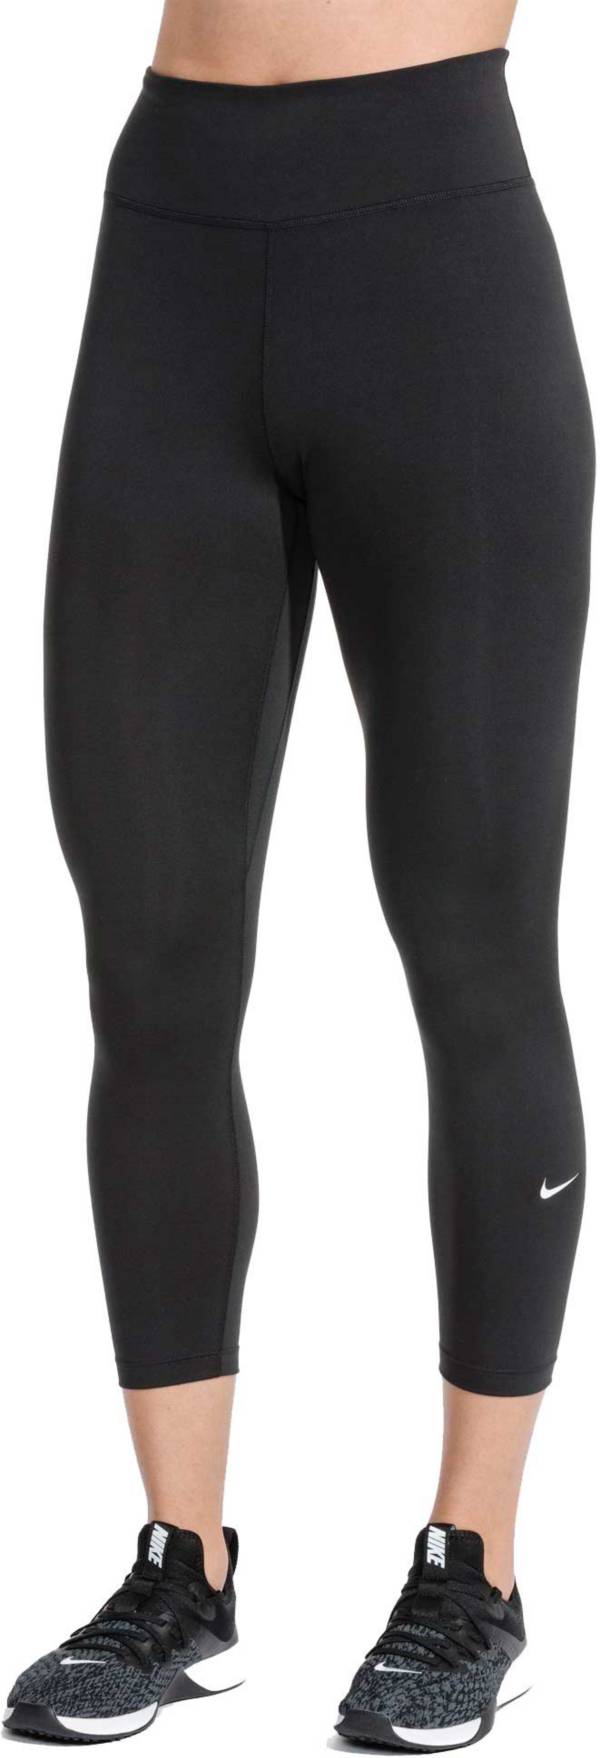 Nike One Women's Crop Tights Dick's Sporting Goods